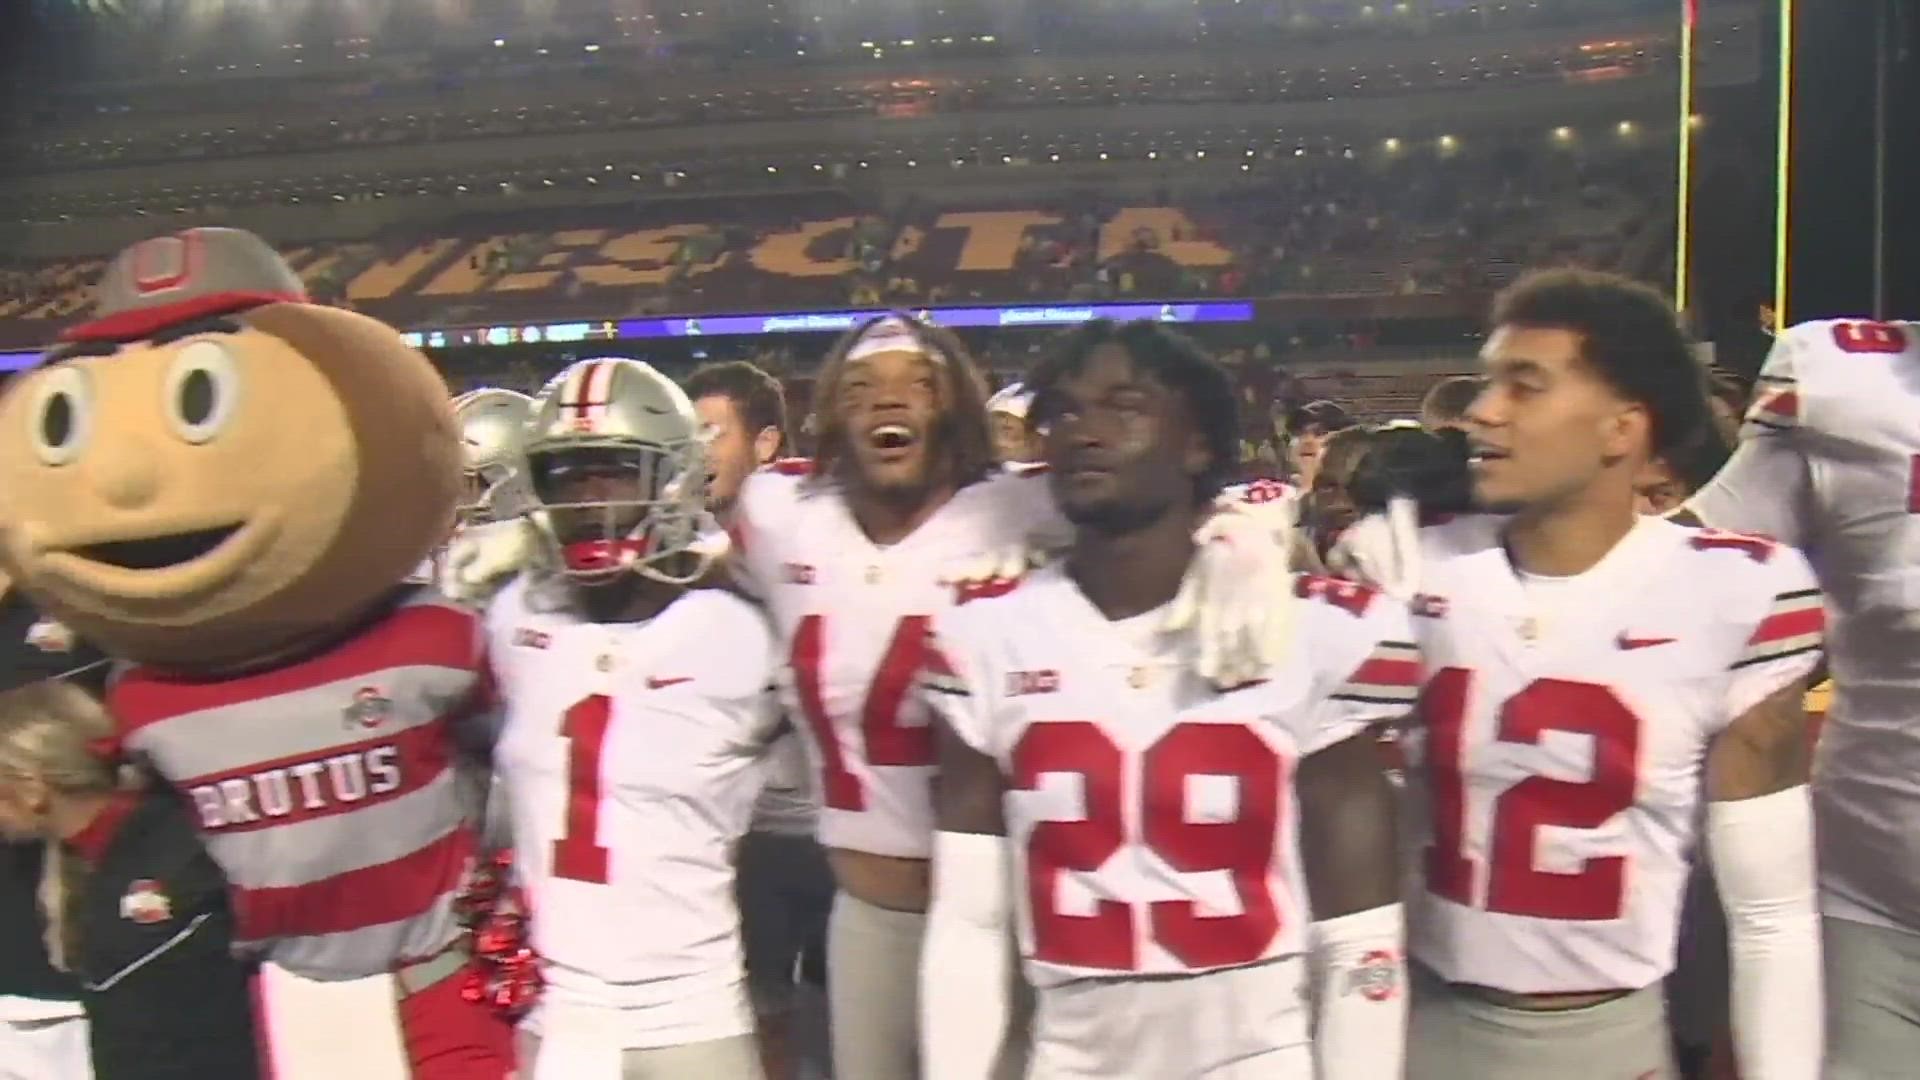 Keeping with tradition, the Ohio State Buckeyes sang 'Carmen Ohio' after their 45-31 win over Minnesota.